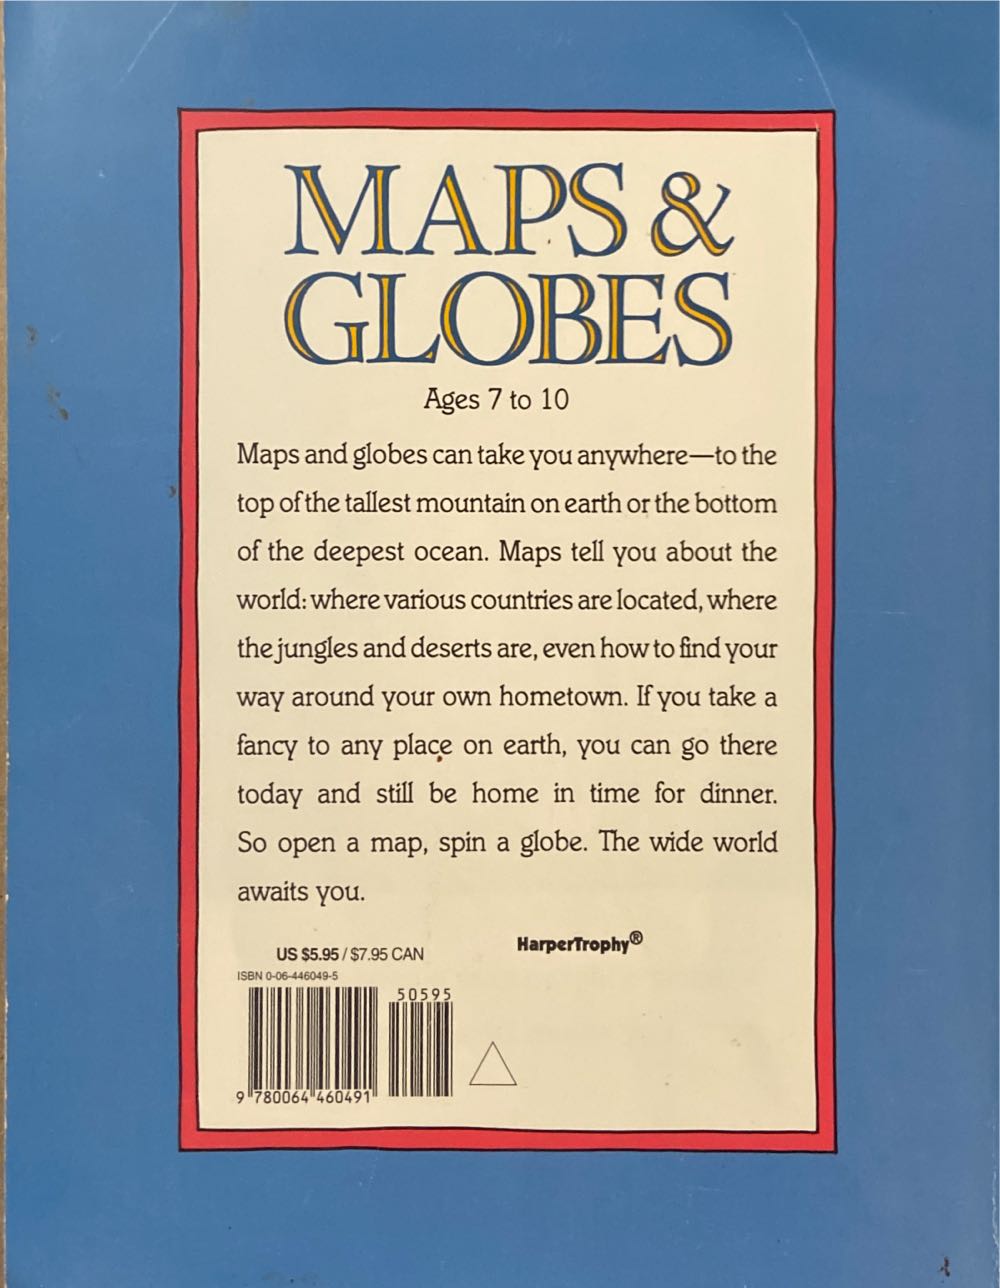 Maps & Globes - Jack Knowlton (Harper & Row, Publishers - Paperback) book collectible [Barcode 9780064460491] - Main Image 2